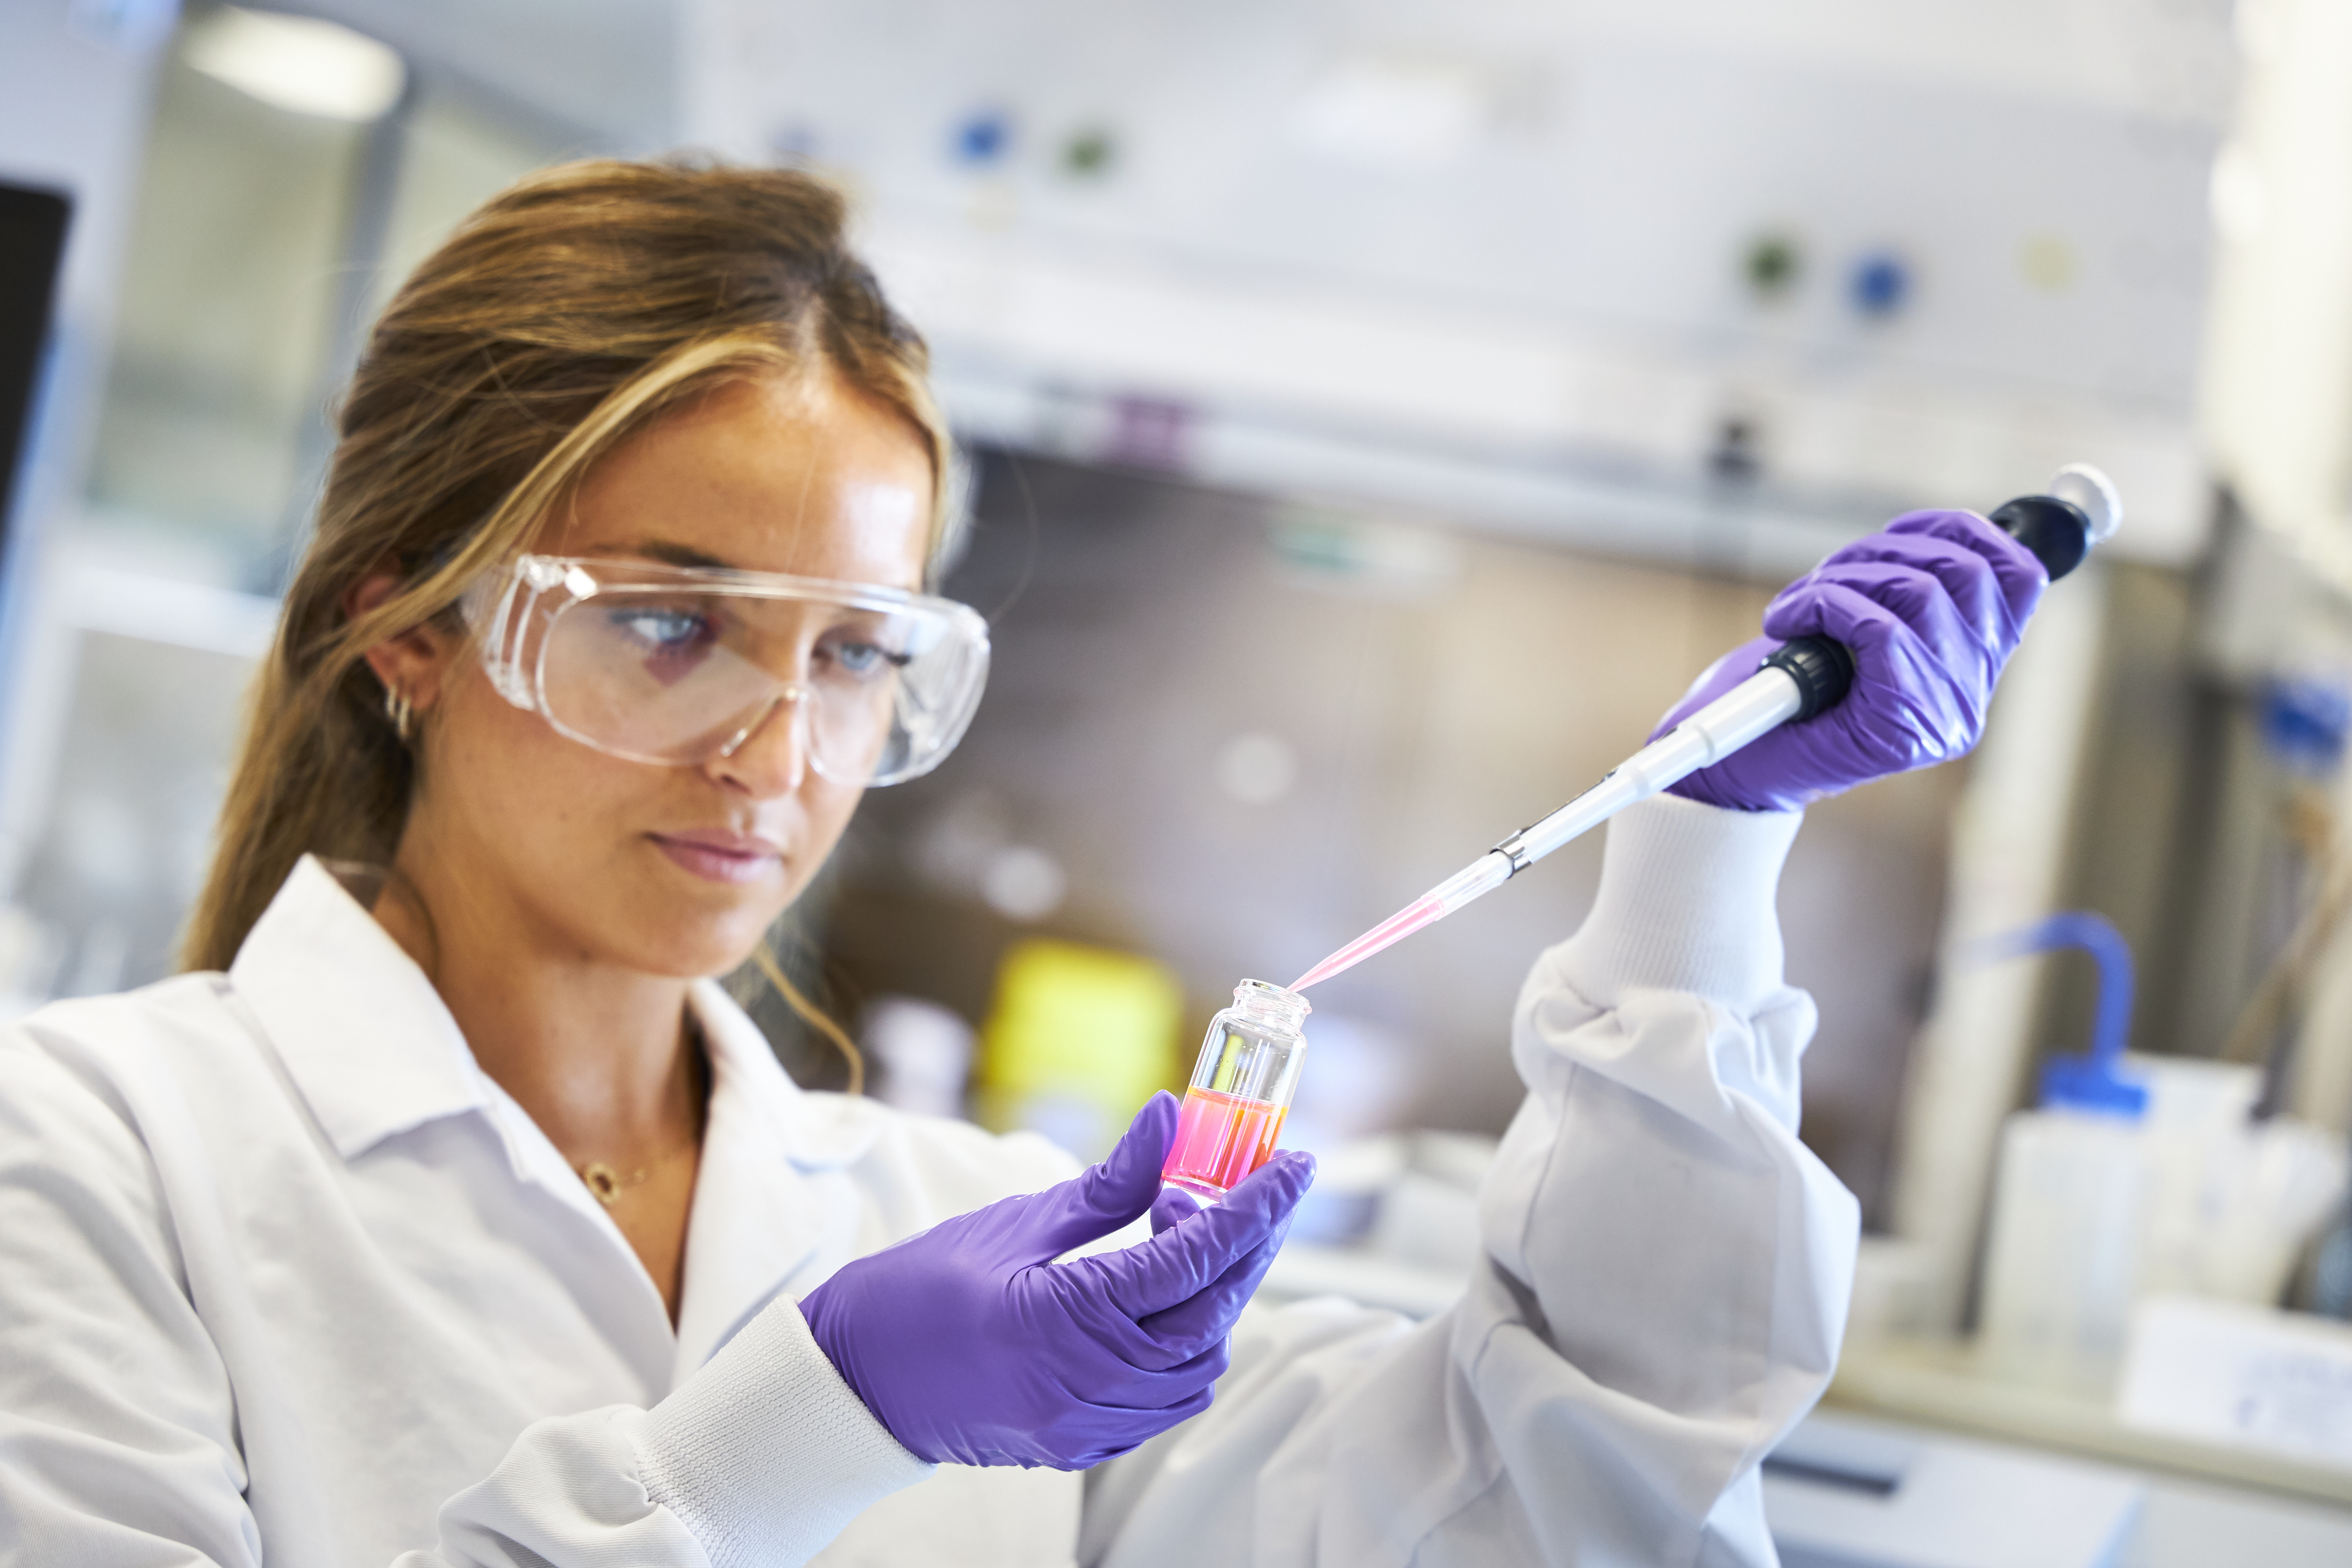 Close up of scientist using a pipette at lab bench, mask off, looking down, close up, side view (high res)